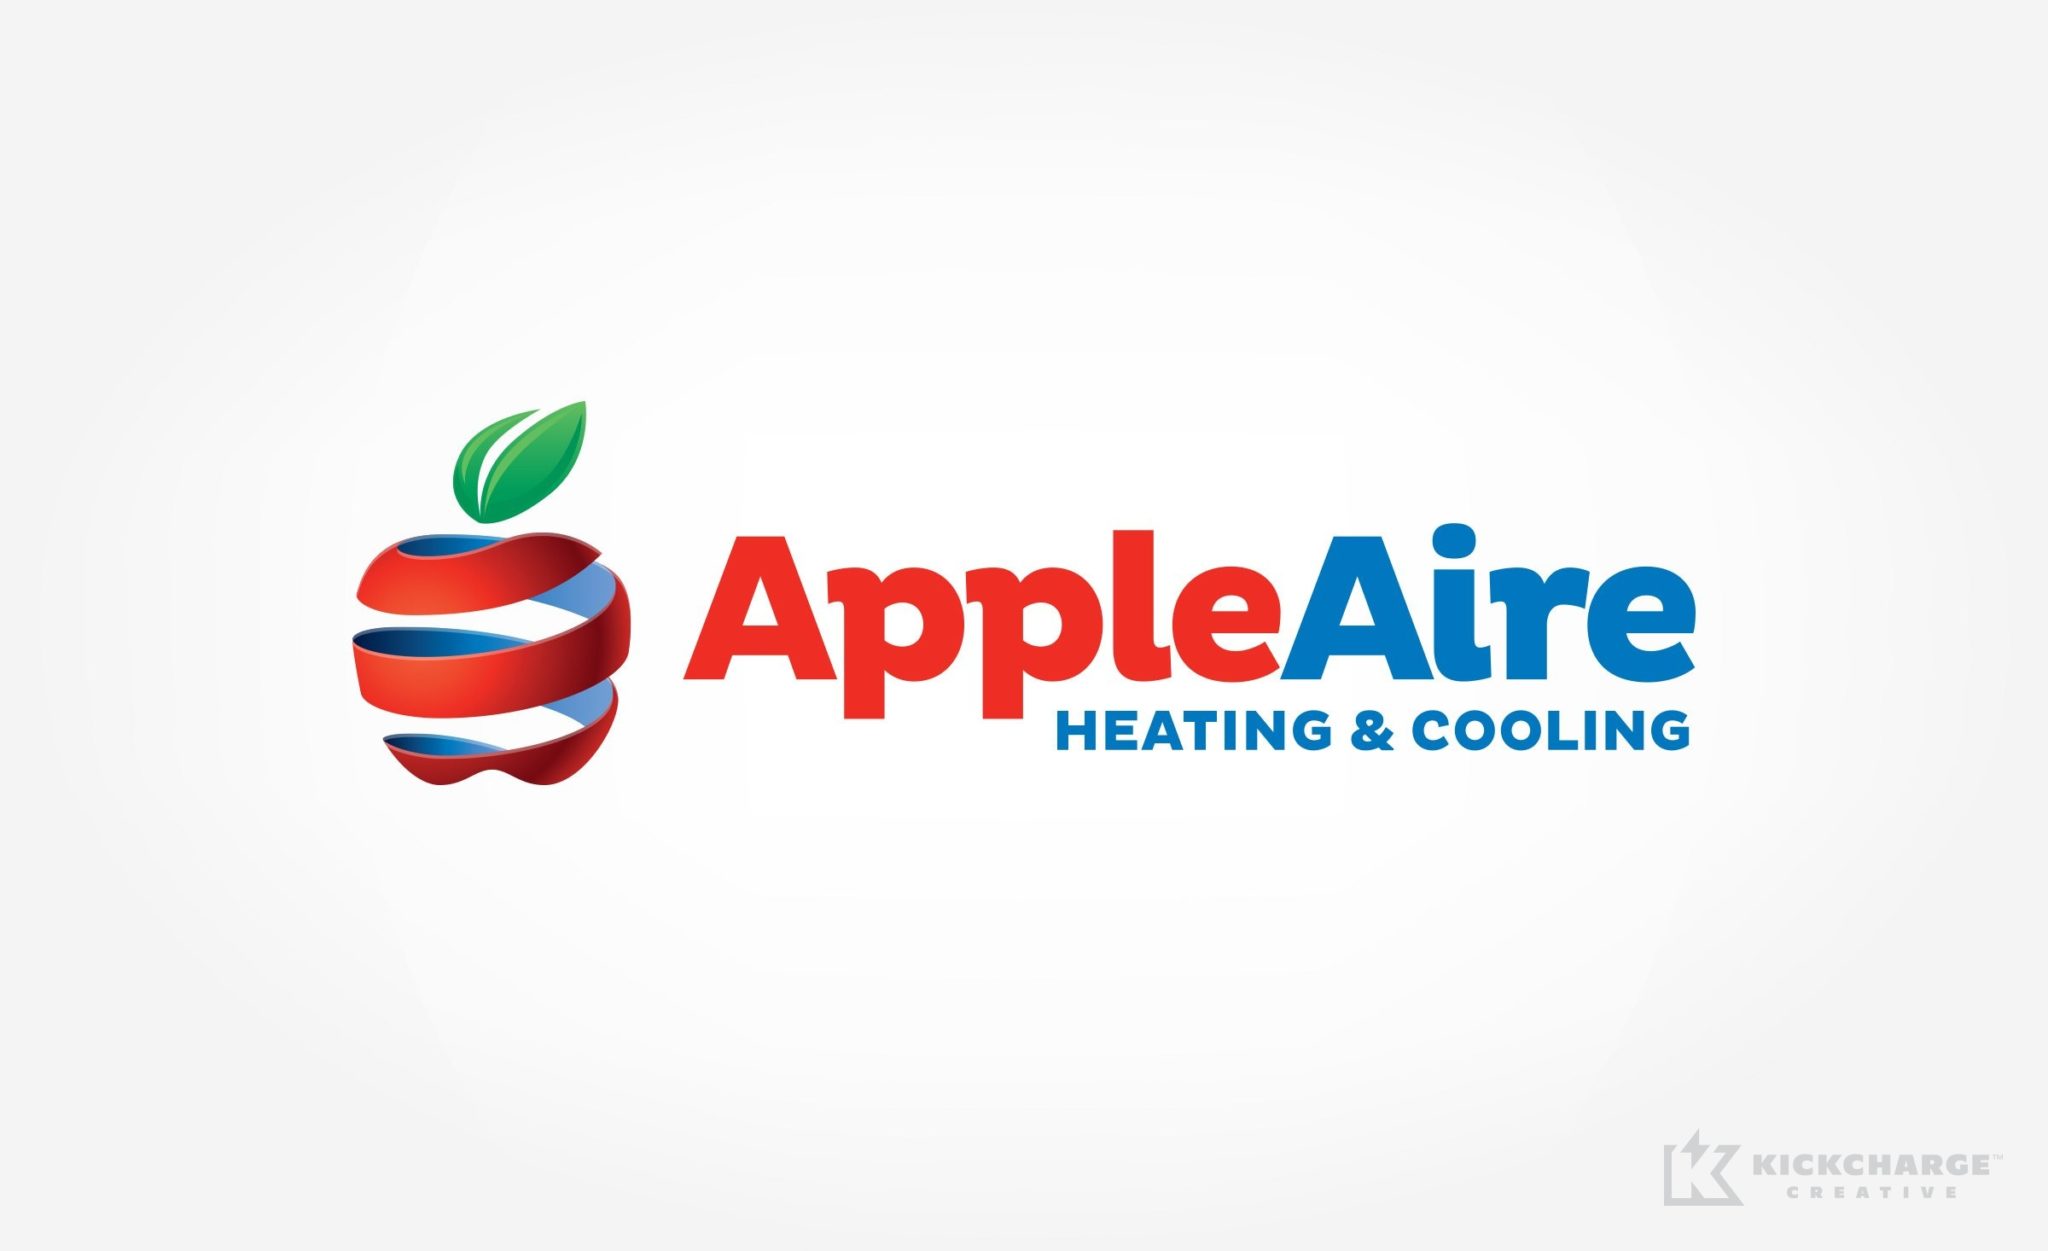 AppleAire Heating & Cooling